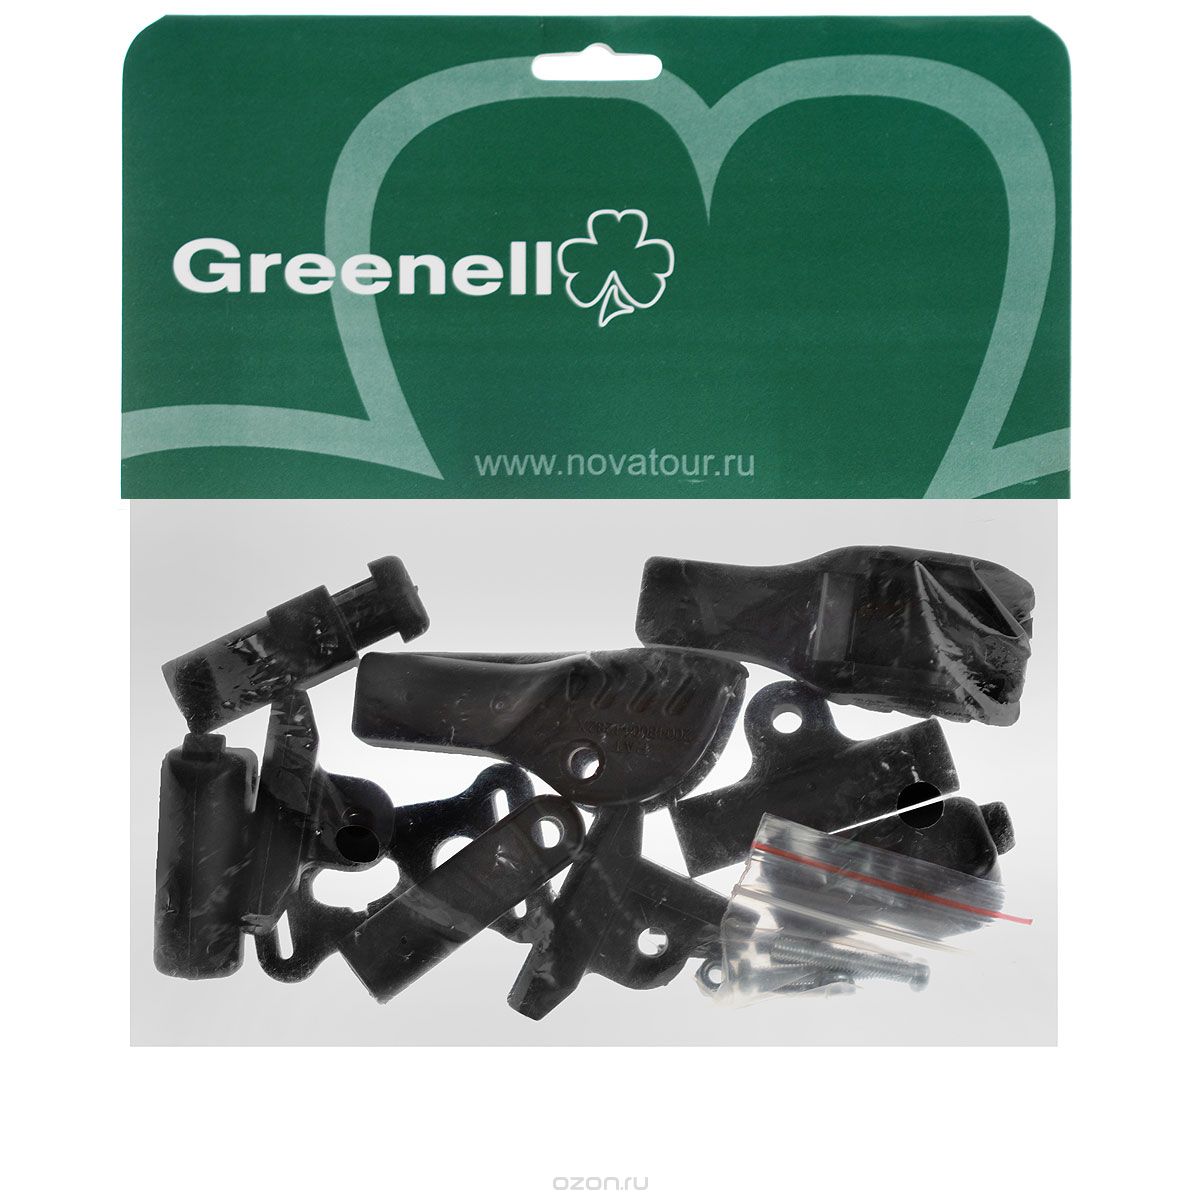  Greenell 